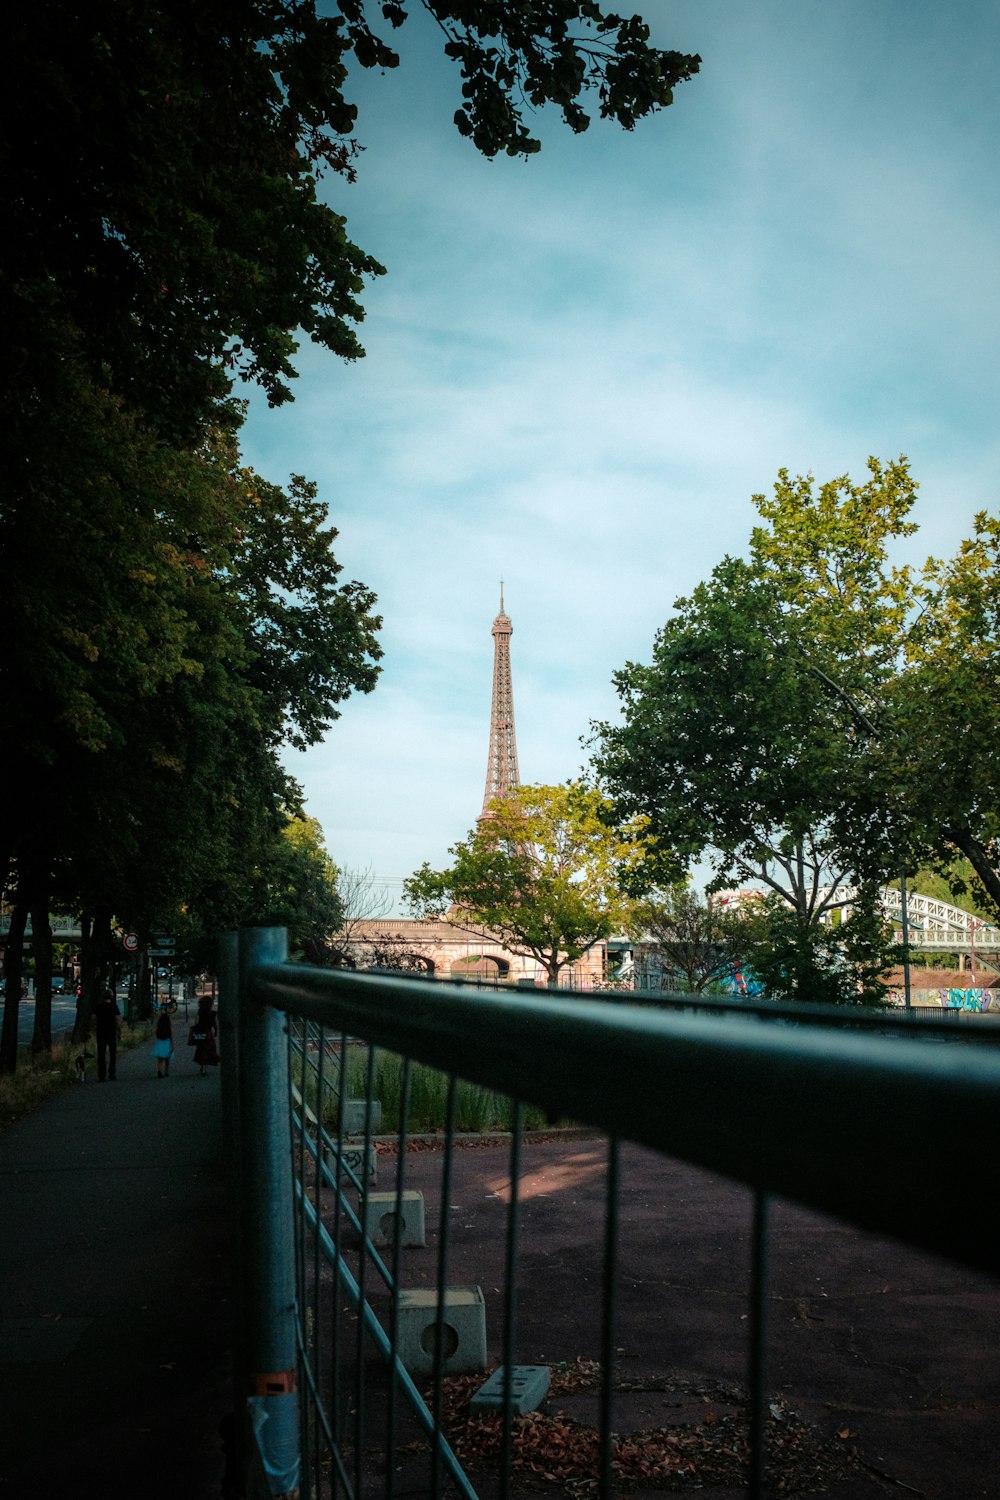 a view of the eiffel tower from across the street